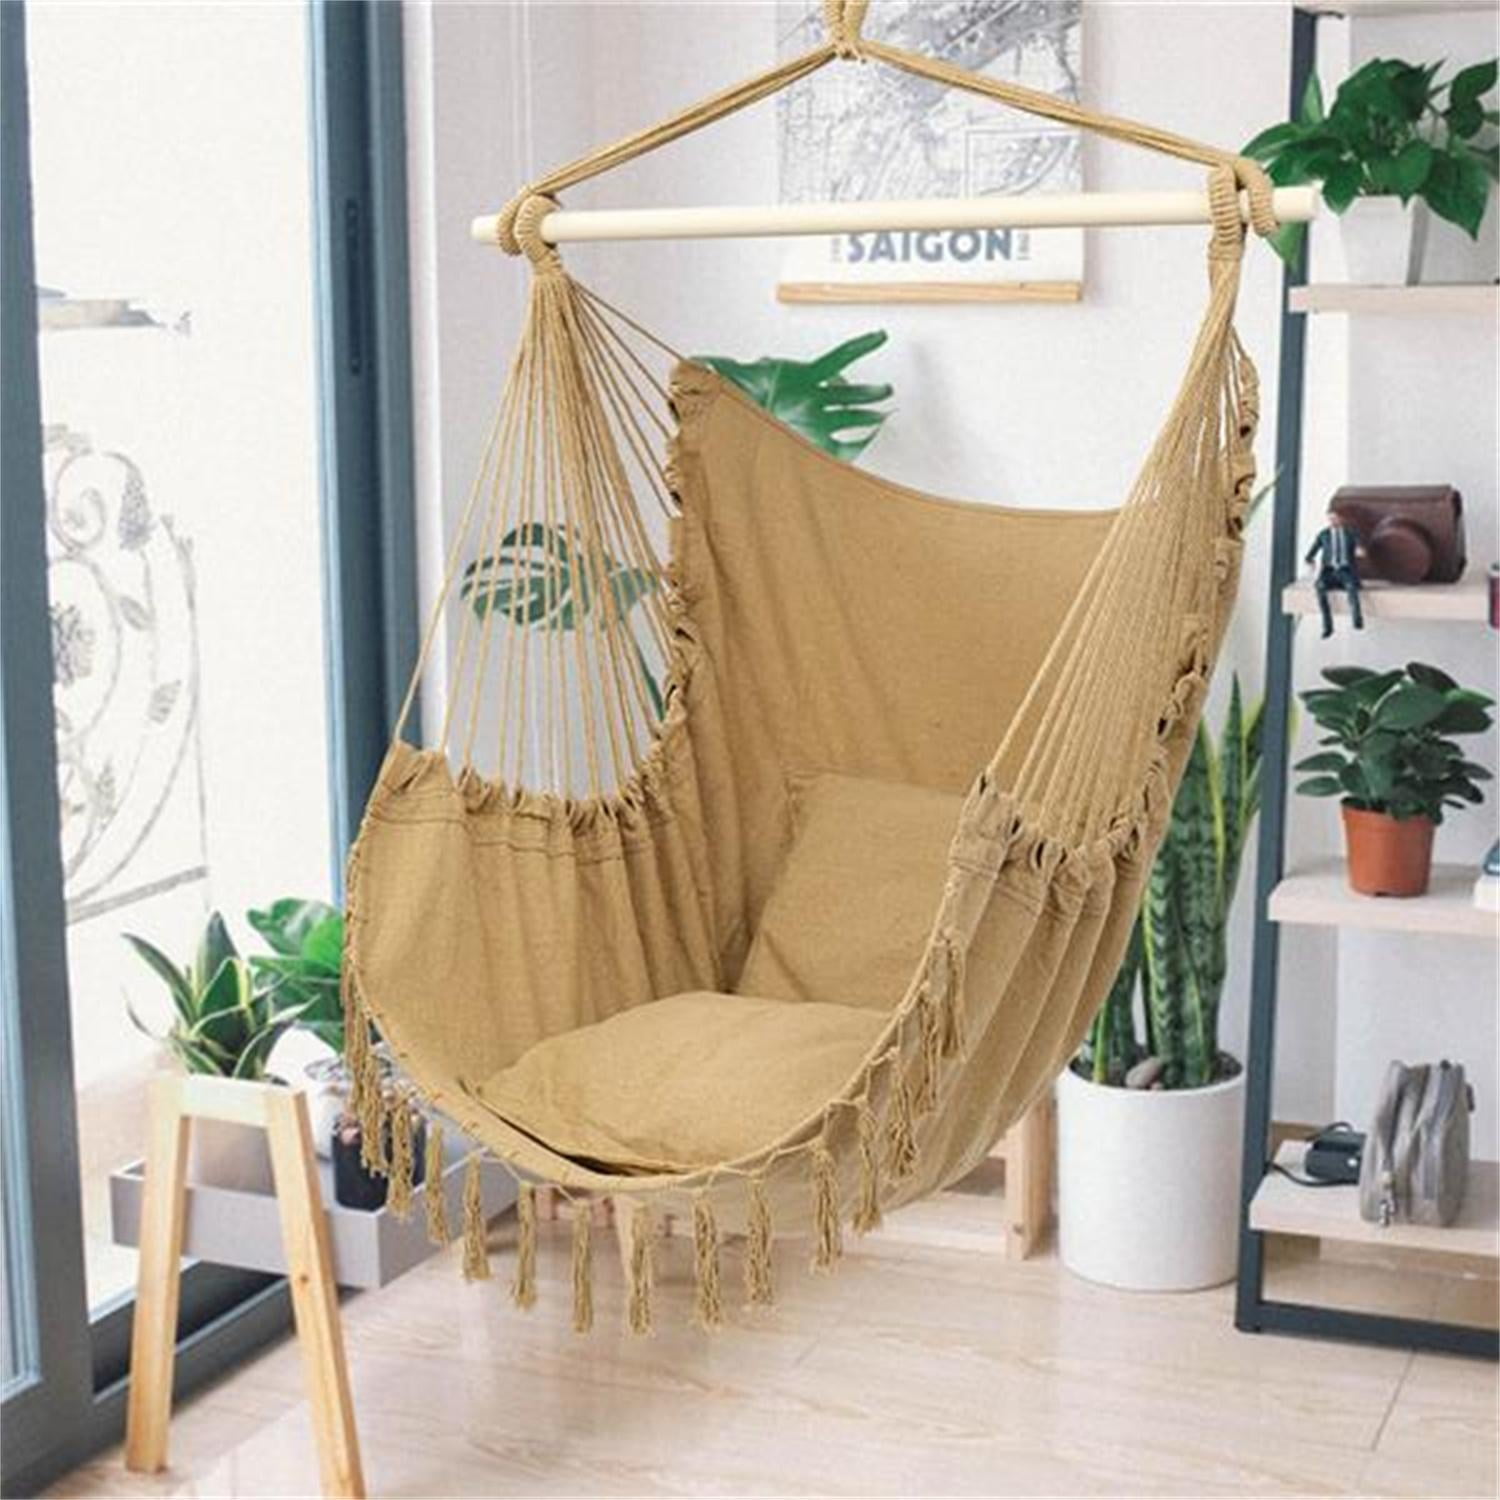 Hanging Macrame Hammock Swing Cotton Rope Hanging Chair for Home Garden 120kg US 